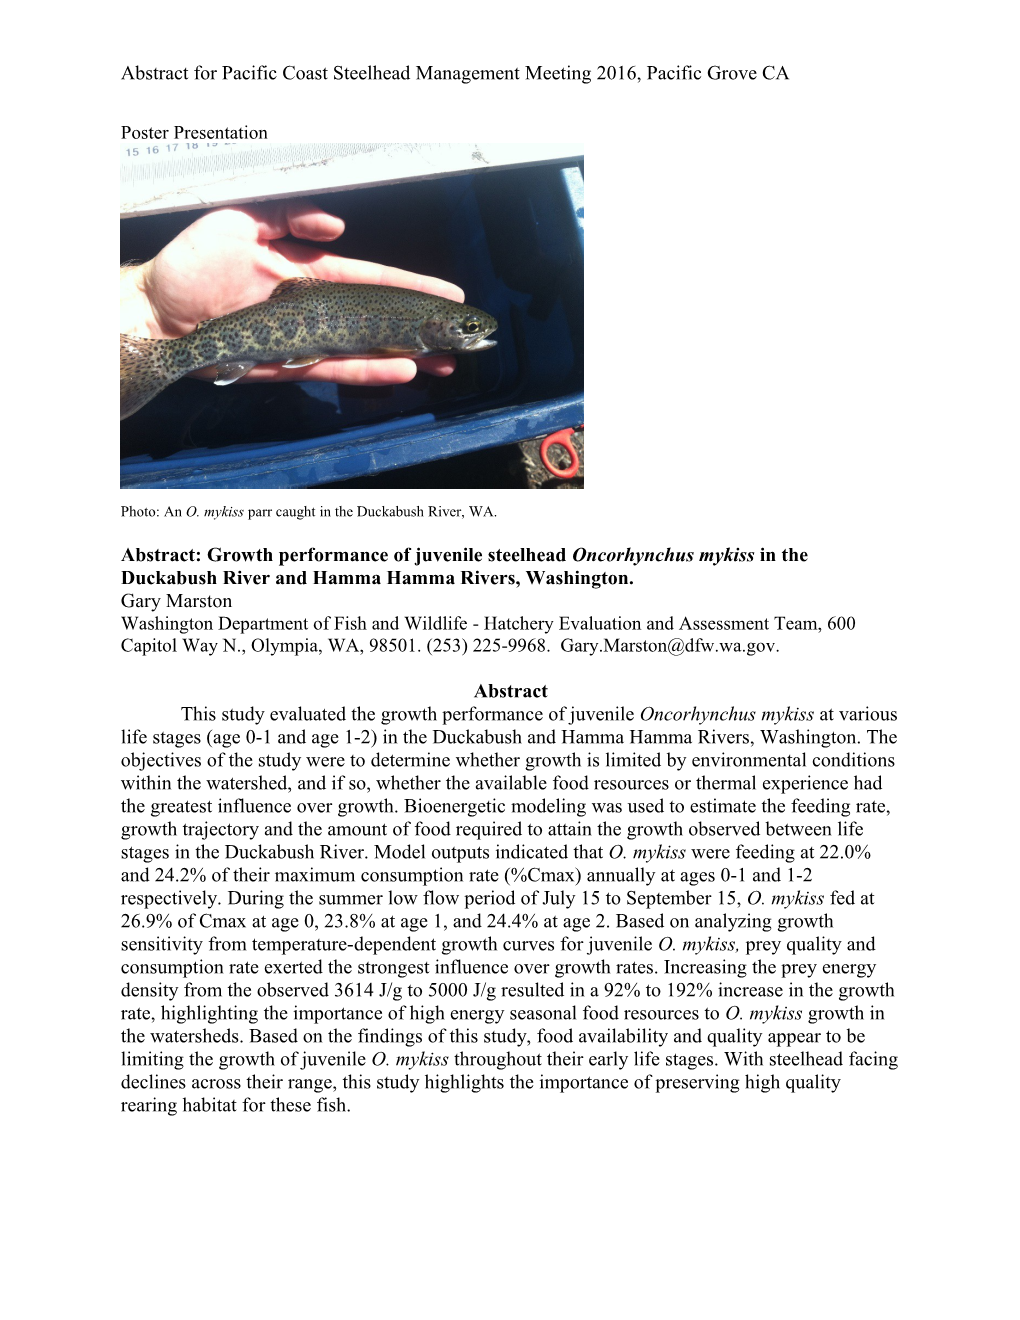 Abstract for Pacific Coast Steelhead Management Meeting 2016, Pacific Groveca